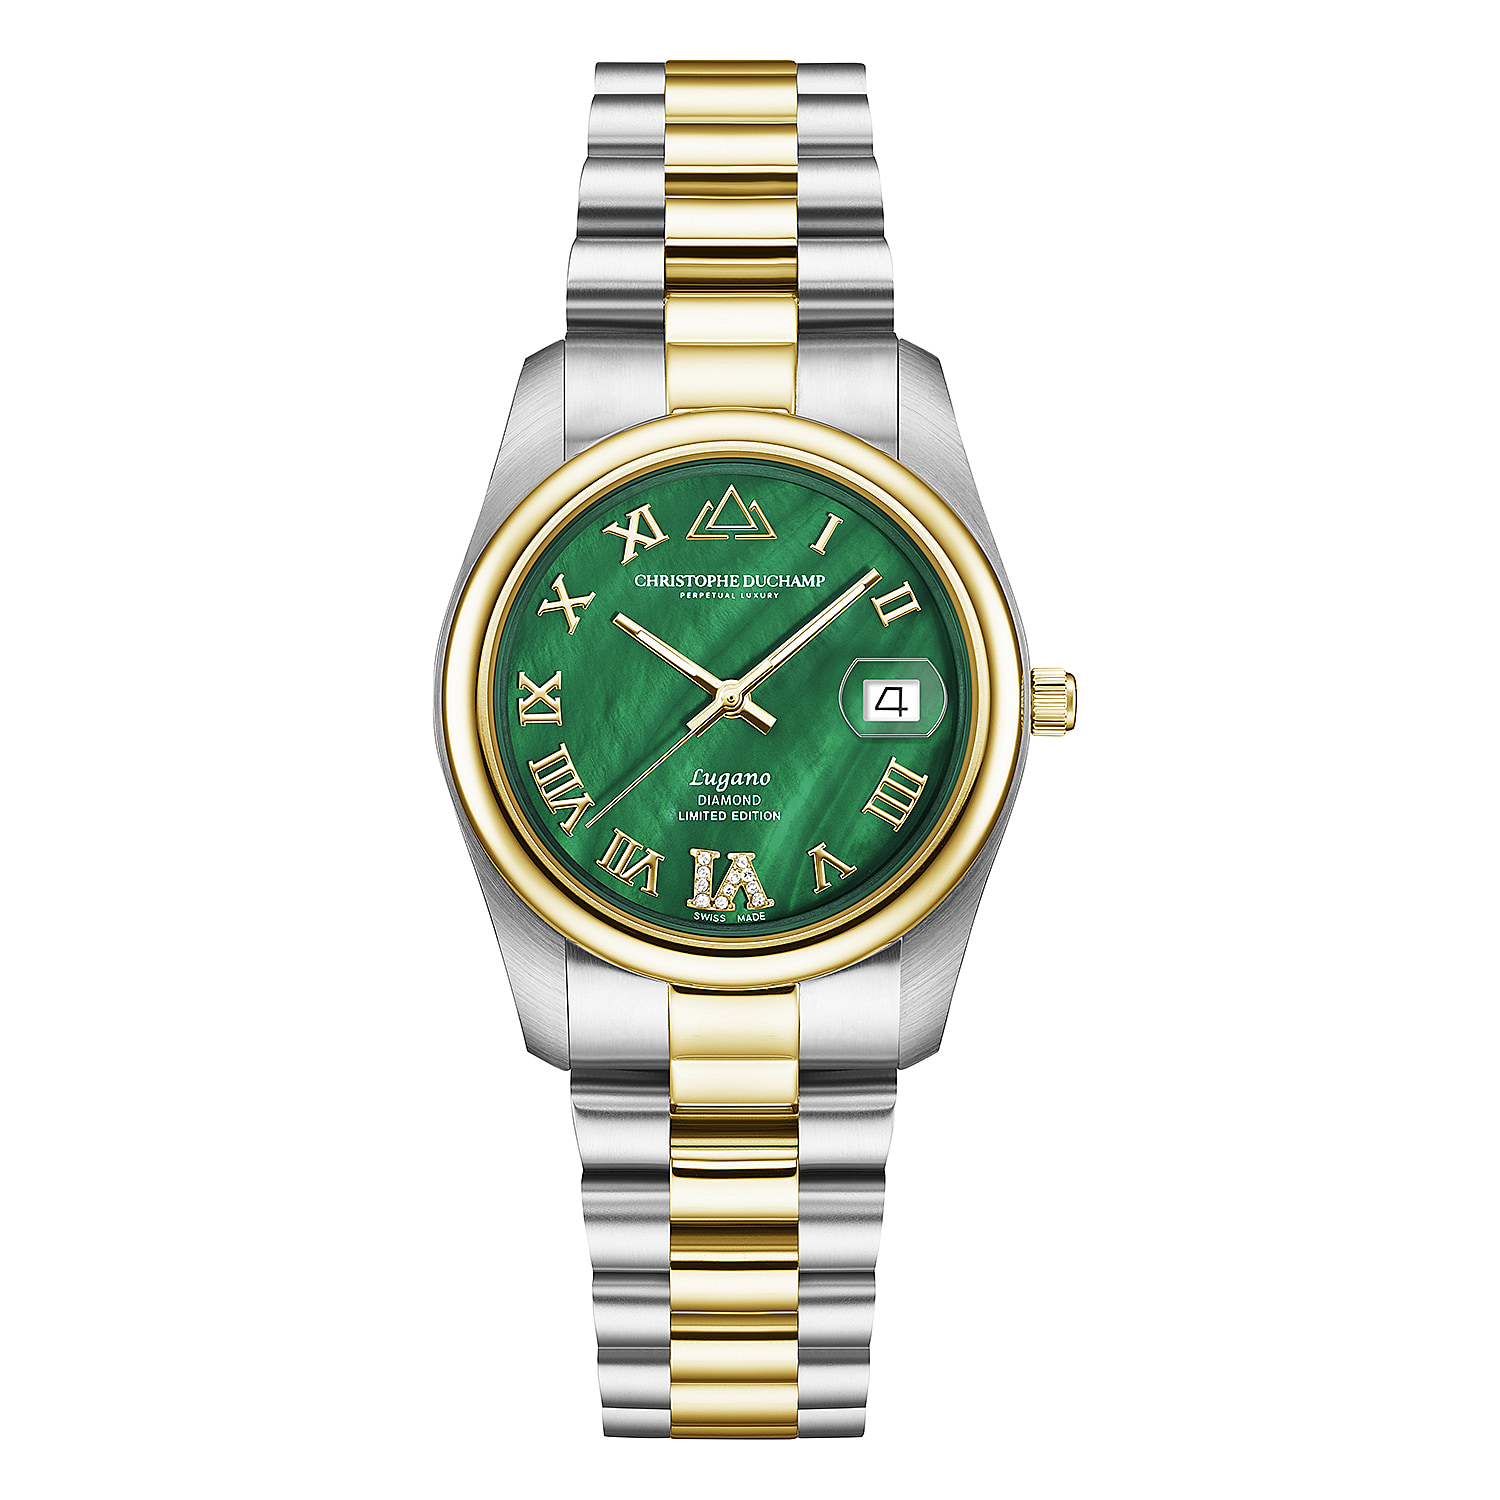 CHRISTOPHE DUCHAMP - Swiss Made LUGANO 11 Diamond Ladies Limited Edition, Swiss Movt, Green Mother of Pearl Dial, 50 Metres Water Resistant, Sapphire Crystal Glass, 34mm Dial in Two Tone